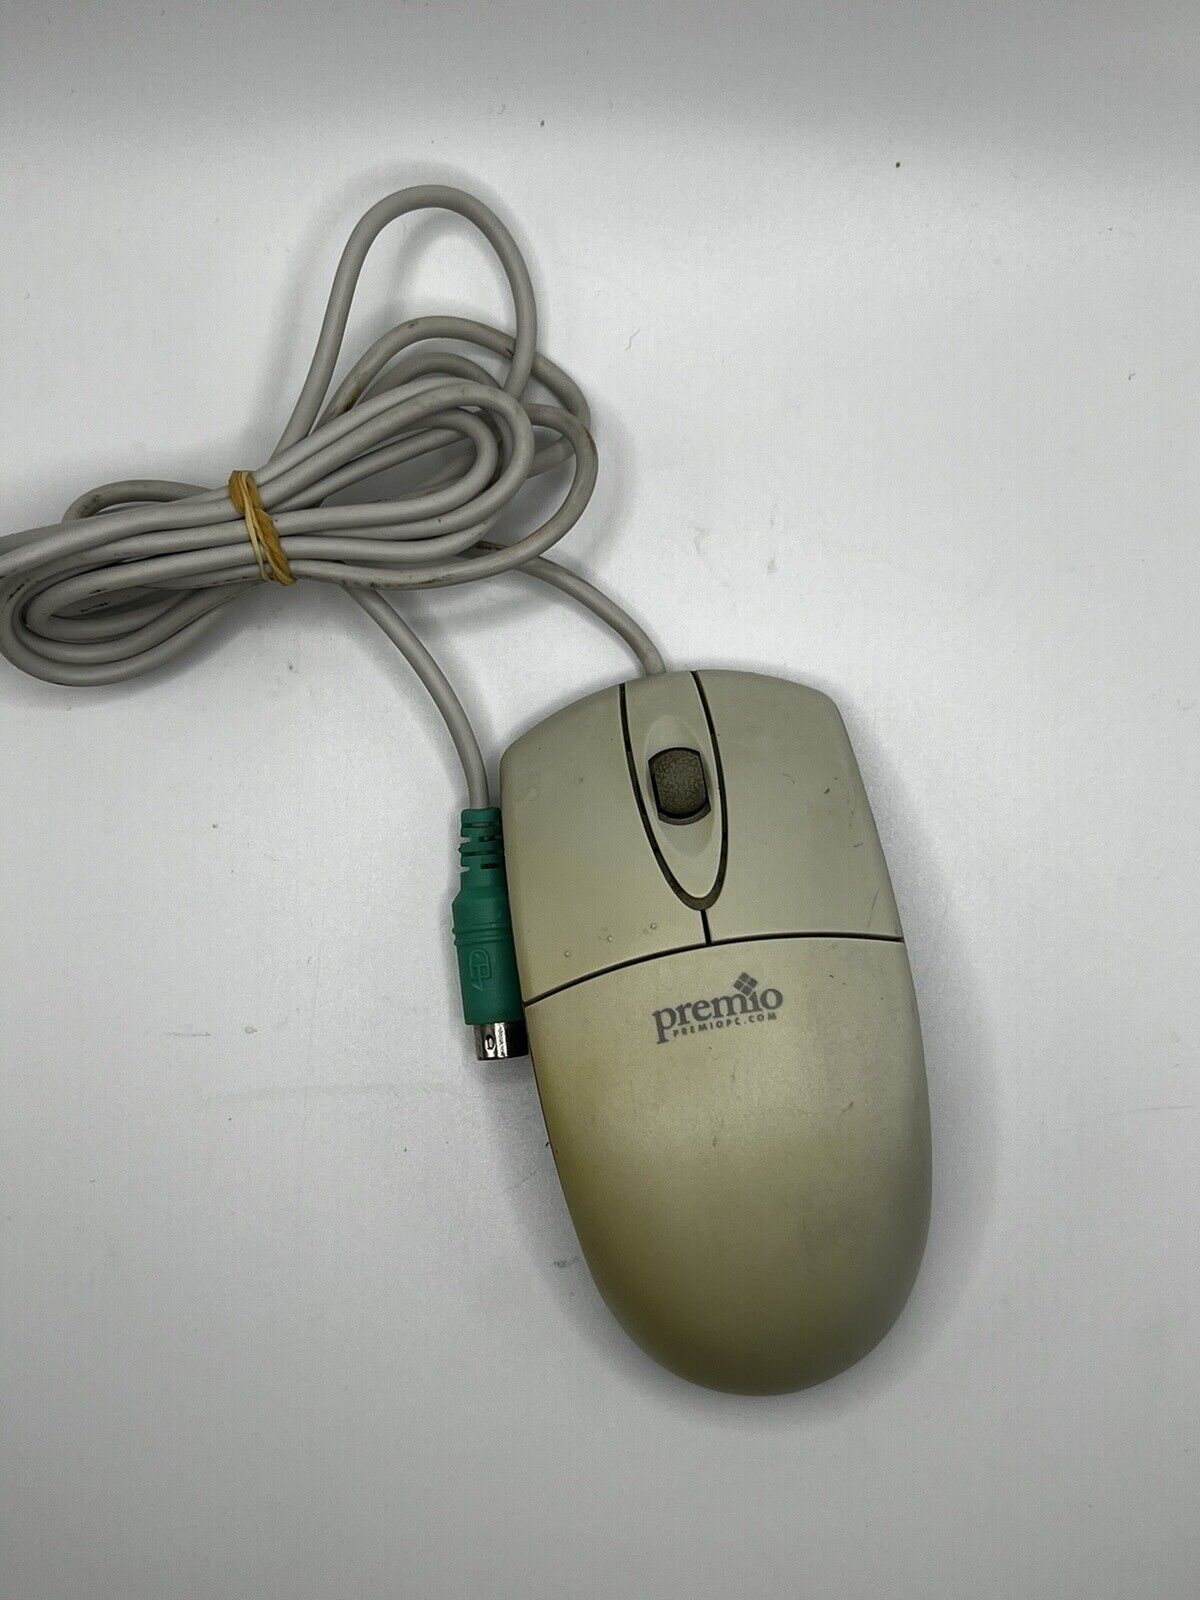 Vintage Premio Mouse Model ECM-S6102 PS/2 Connector Tested & Working